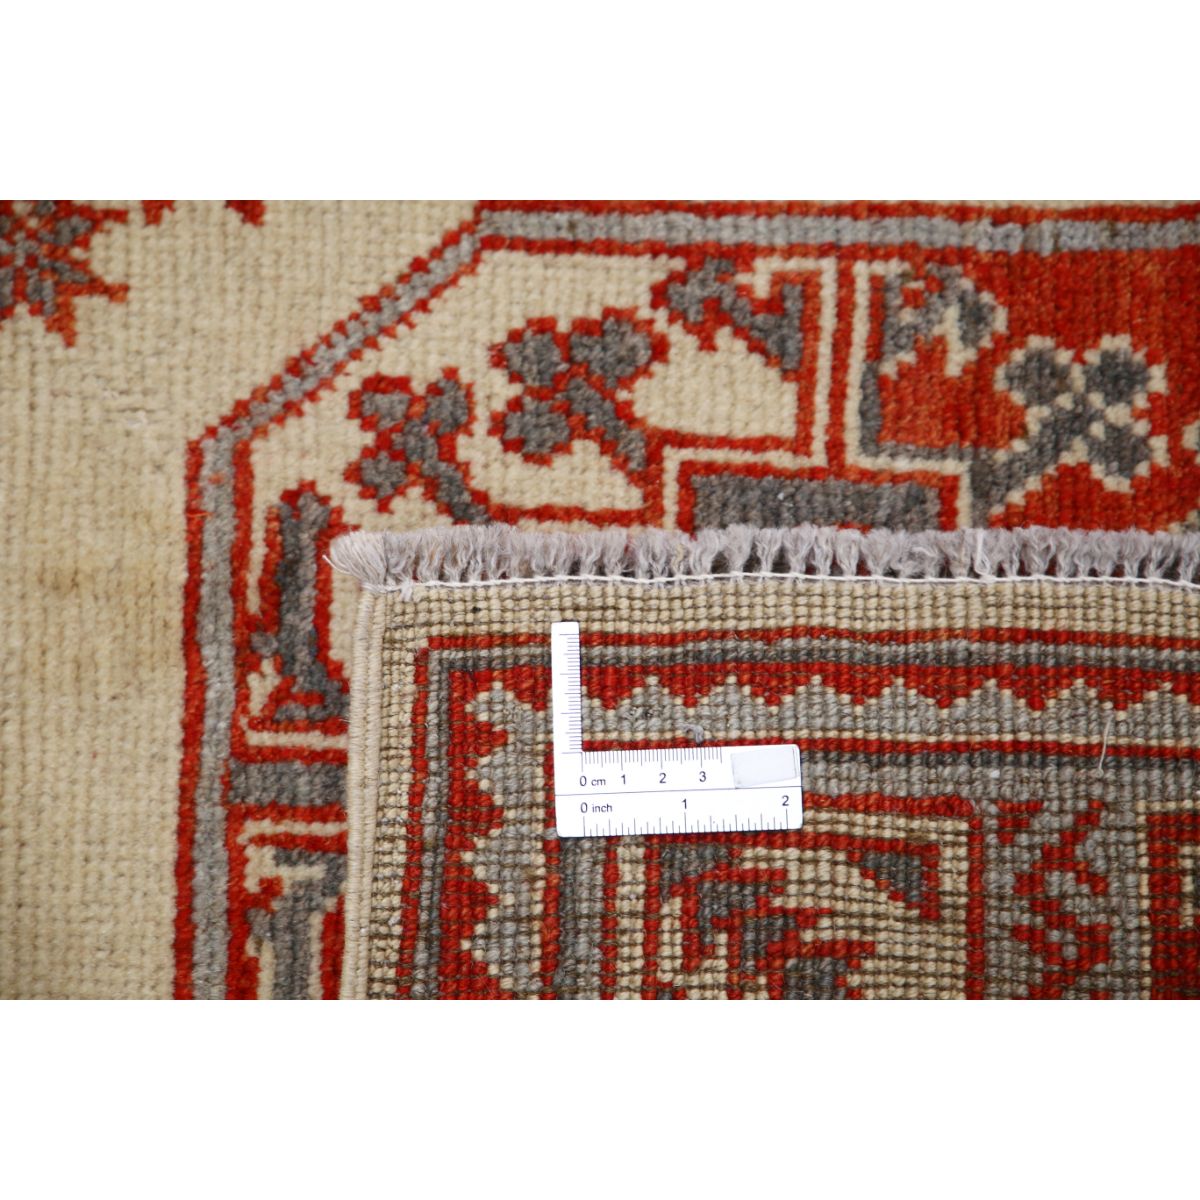 Revival 4' 11" X 6' 11" Wool Hand Knotted Rug